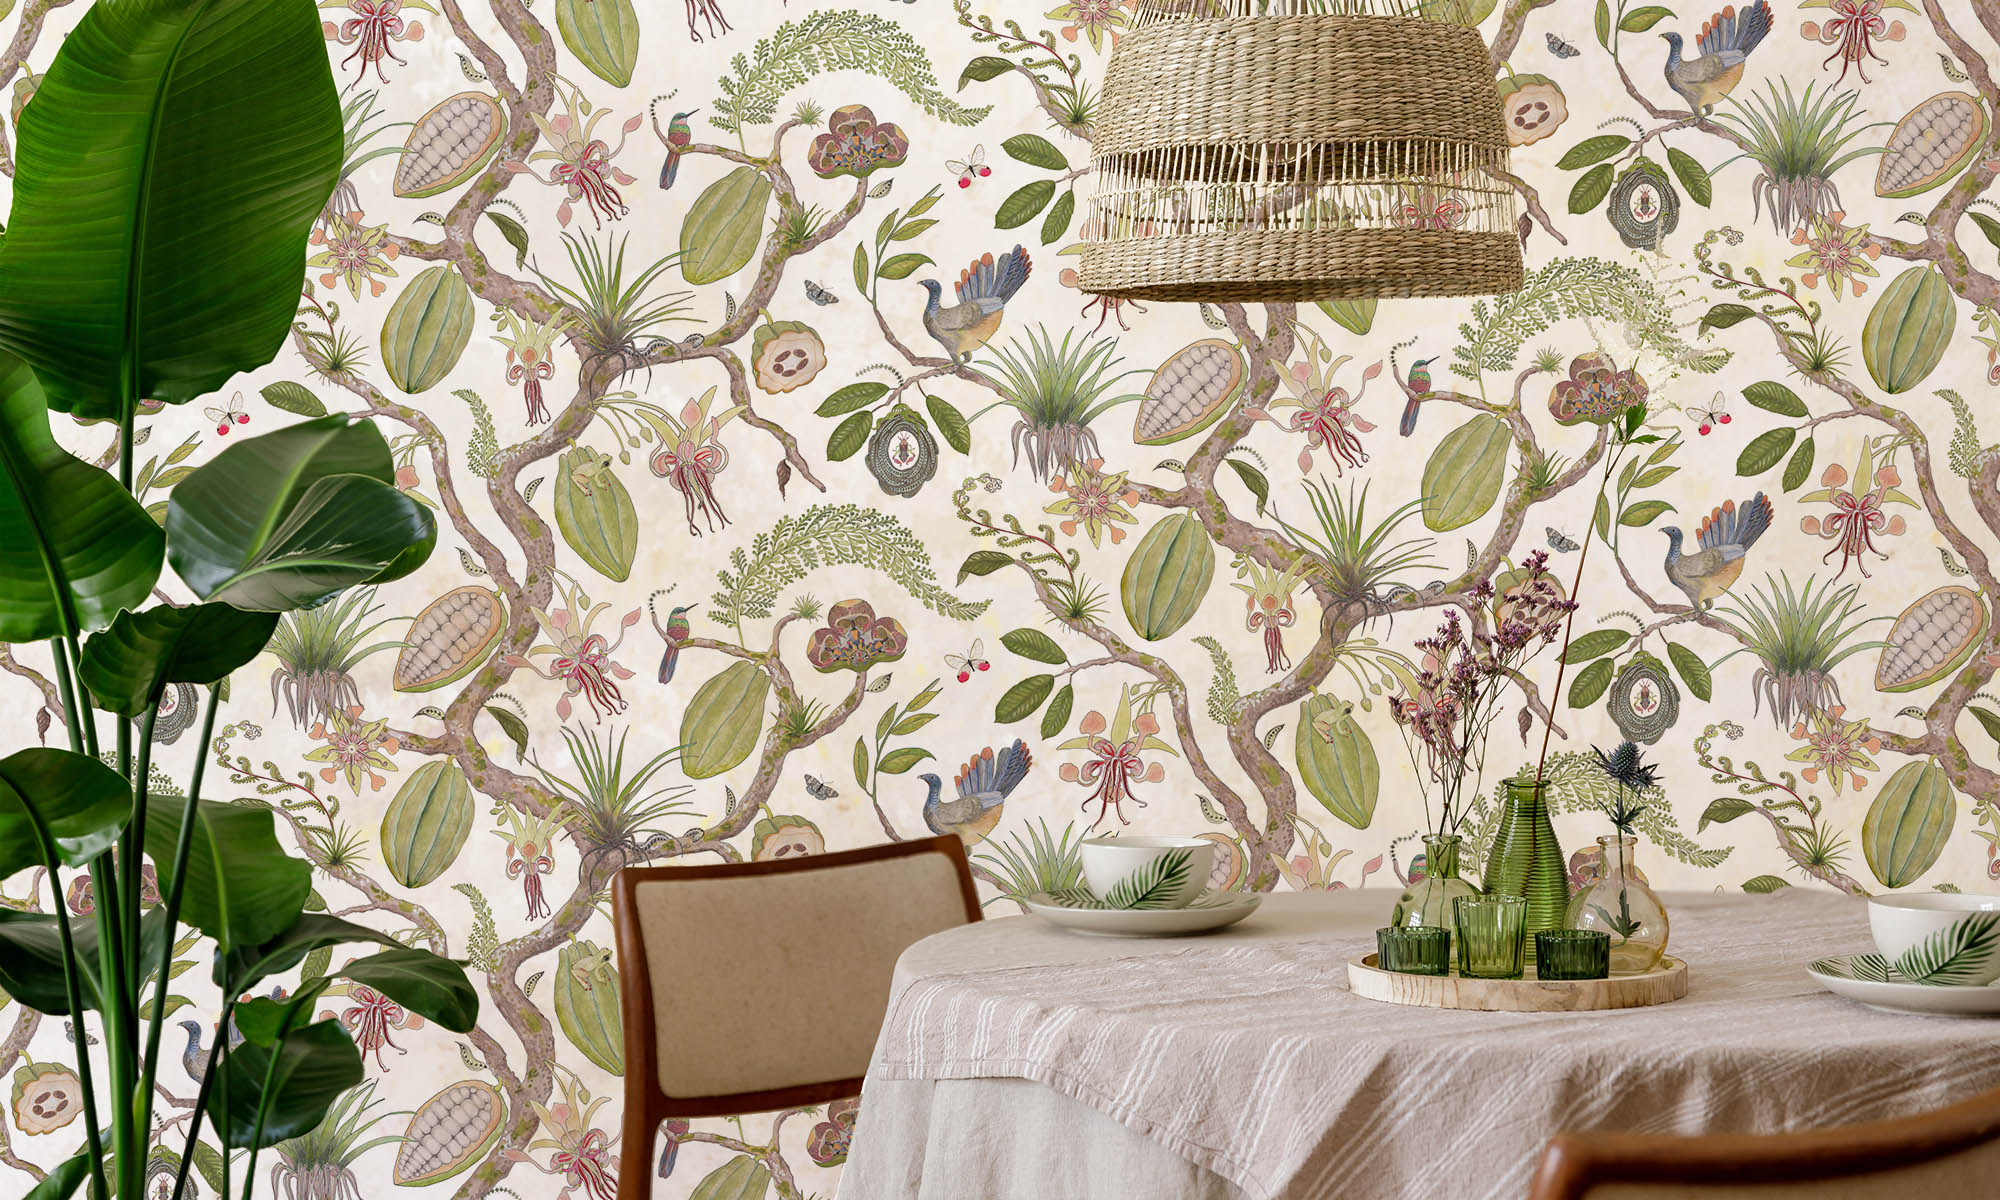 Theobroma cacao wallpaper and a table